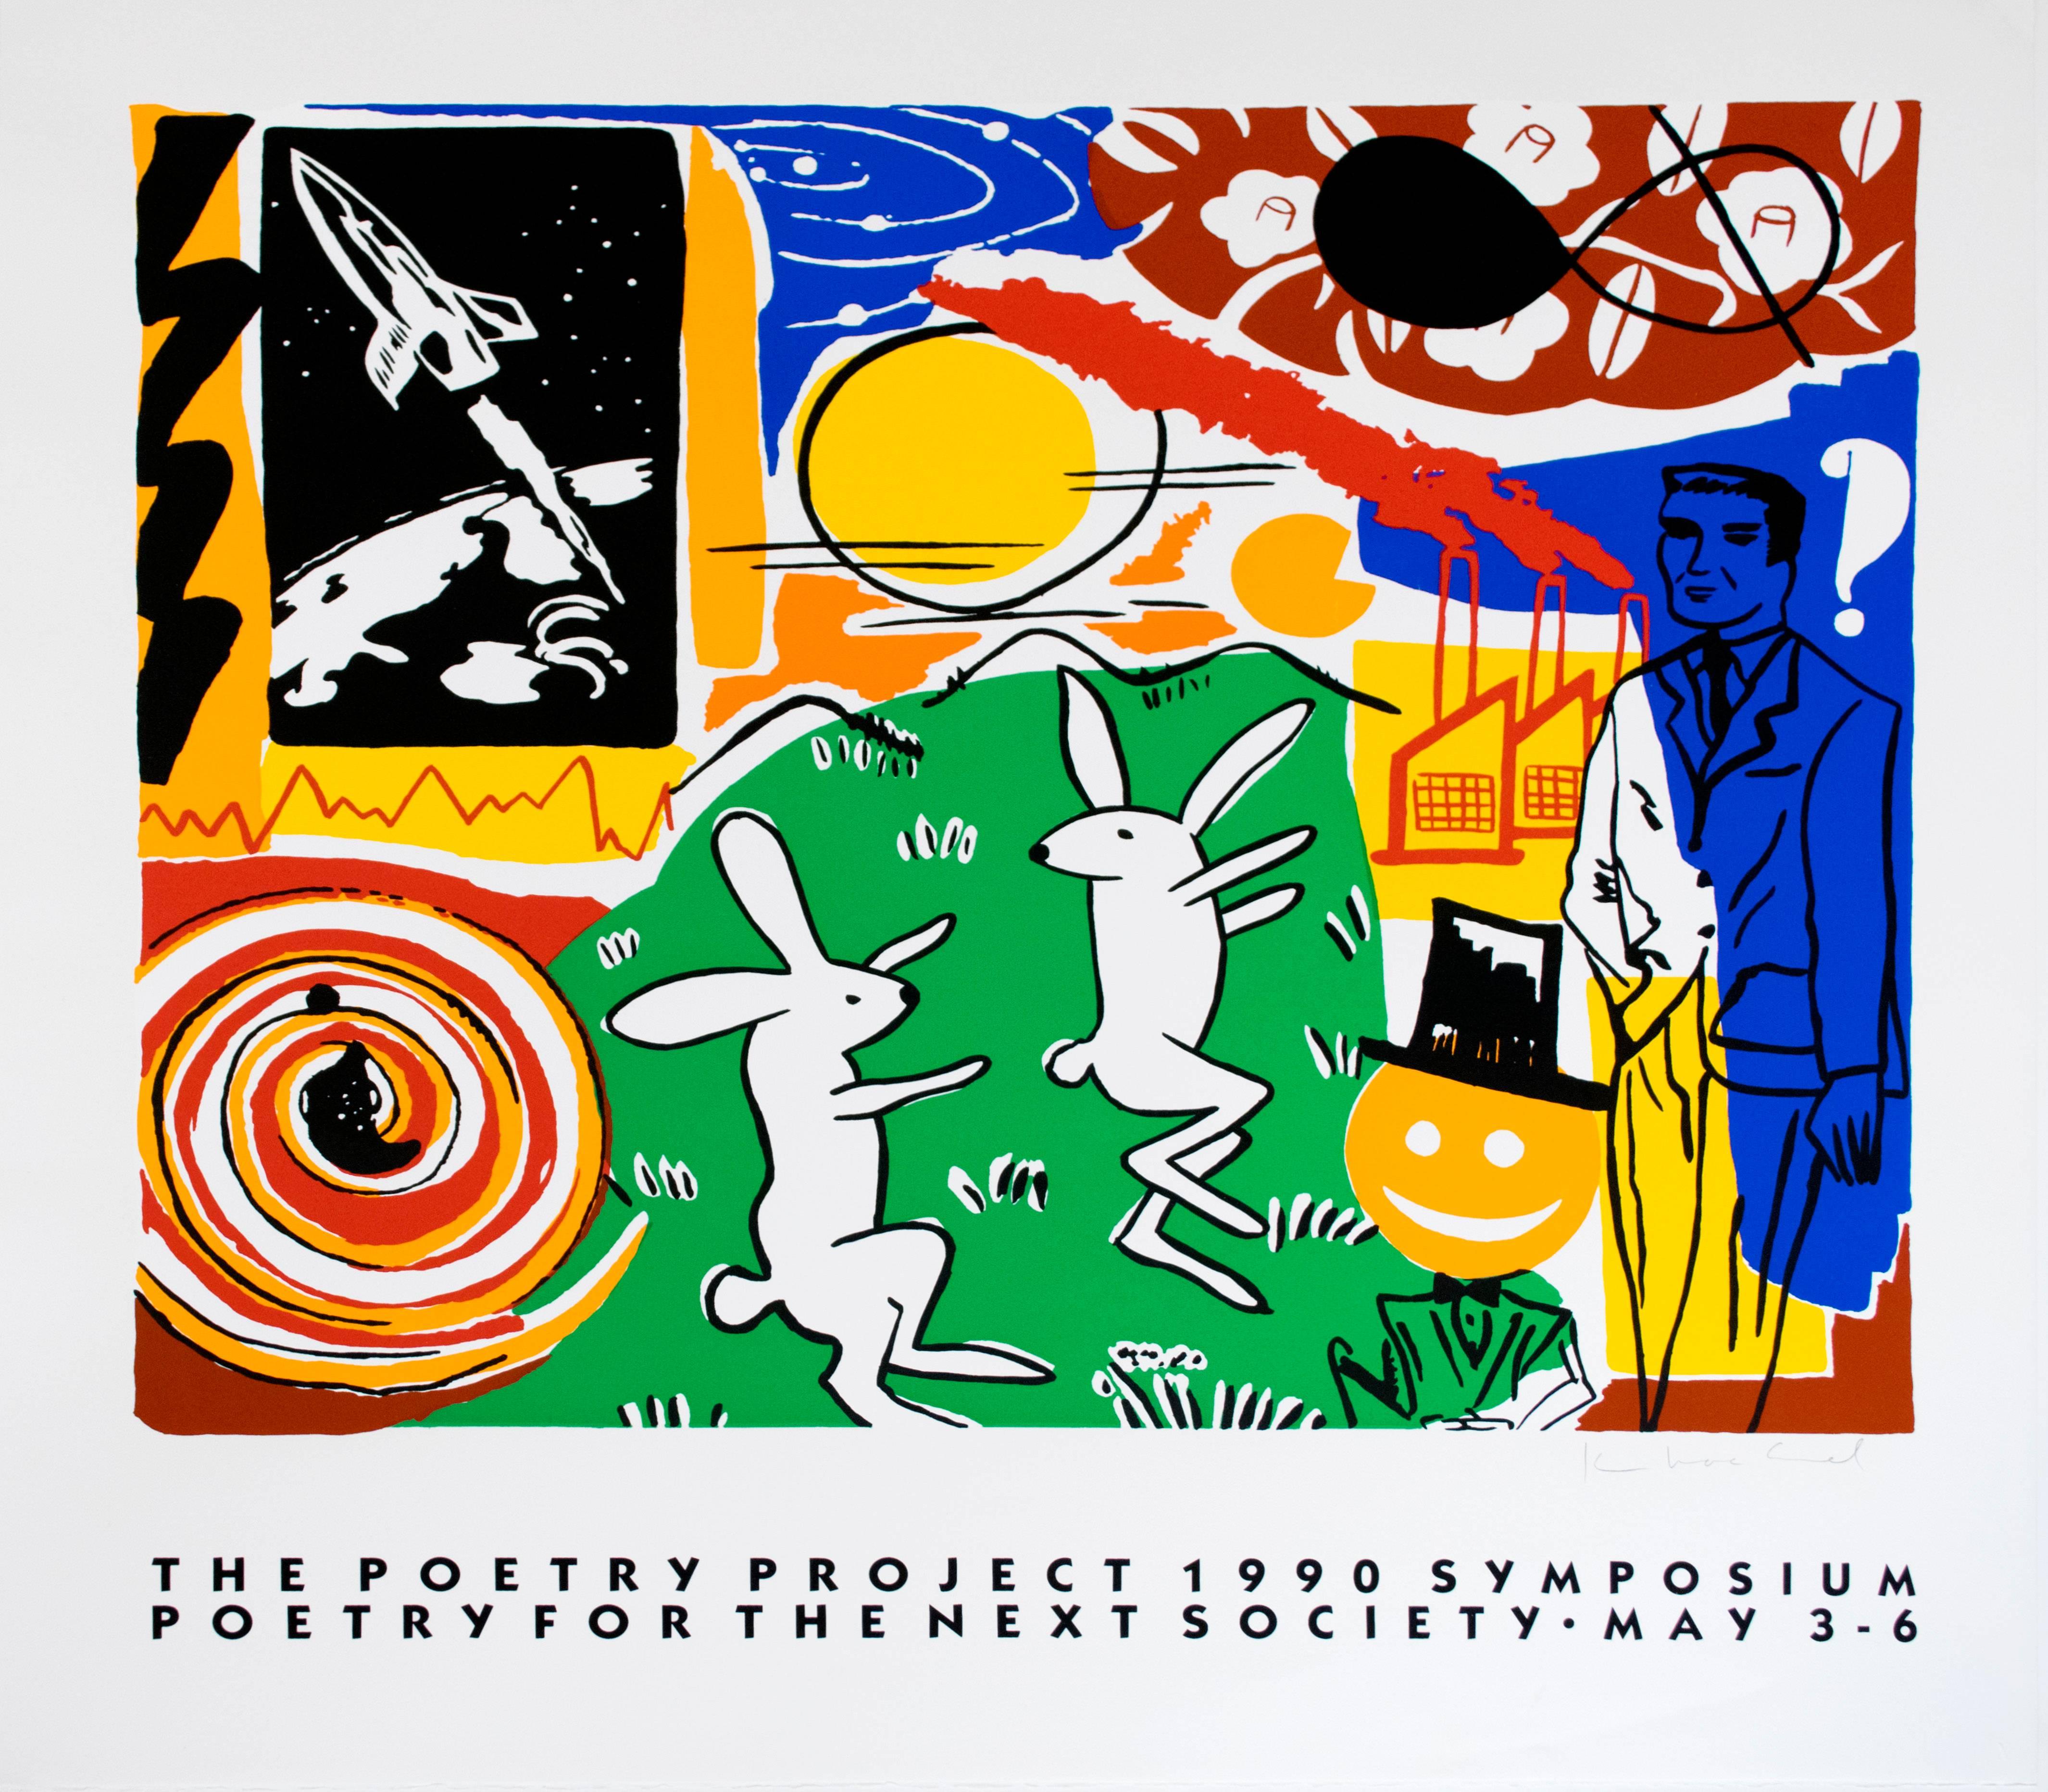 Kim MacConnel
Poetry Project, 1990 
Color silkscreen
27 x 29 1/2 in. (68.6 x 75.1 cm)
Signed

The artist Kim MacConnel is a leading figure in the pattern and decoration movement of the 1970s, known for his paintings and fabric collages.  MacConnel's